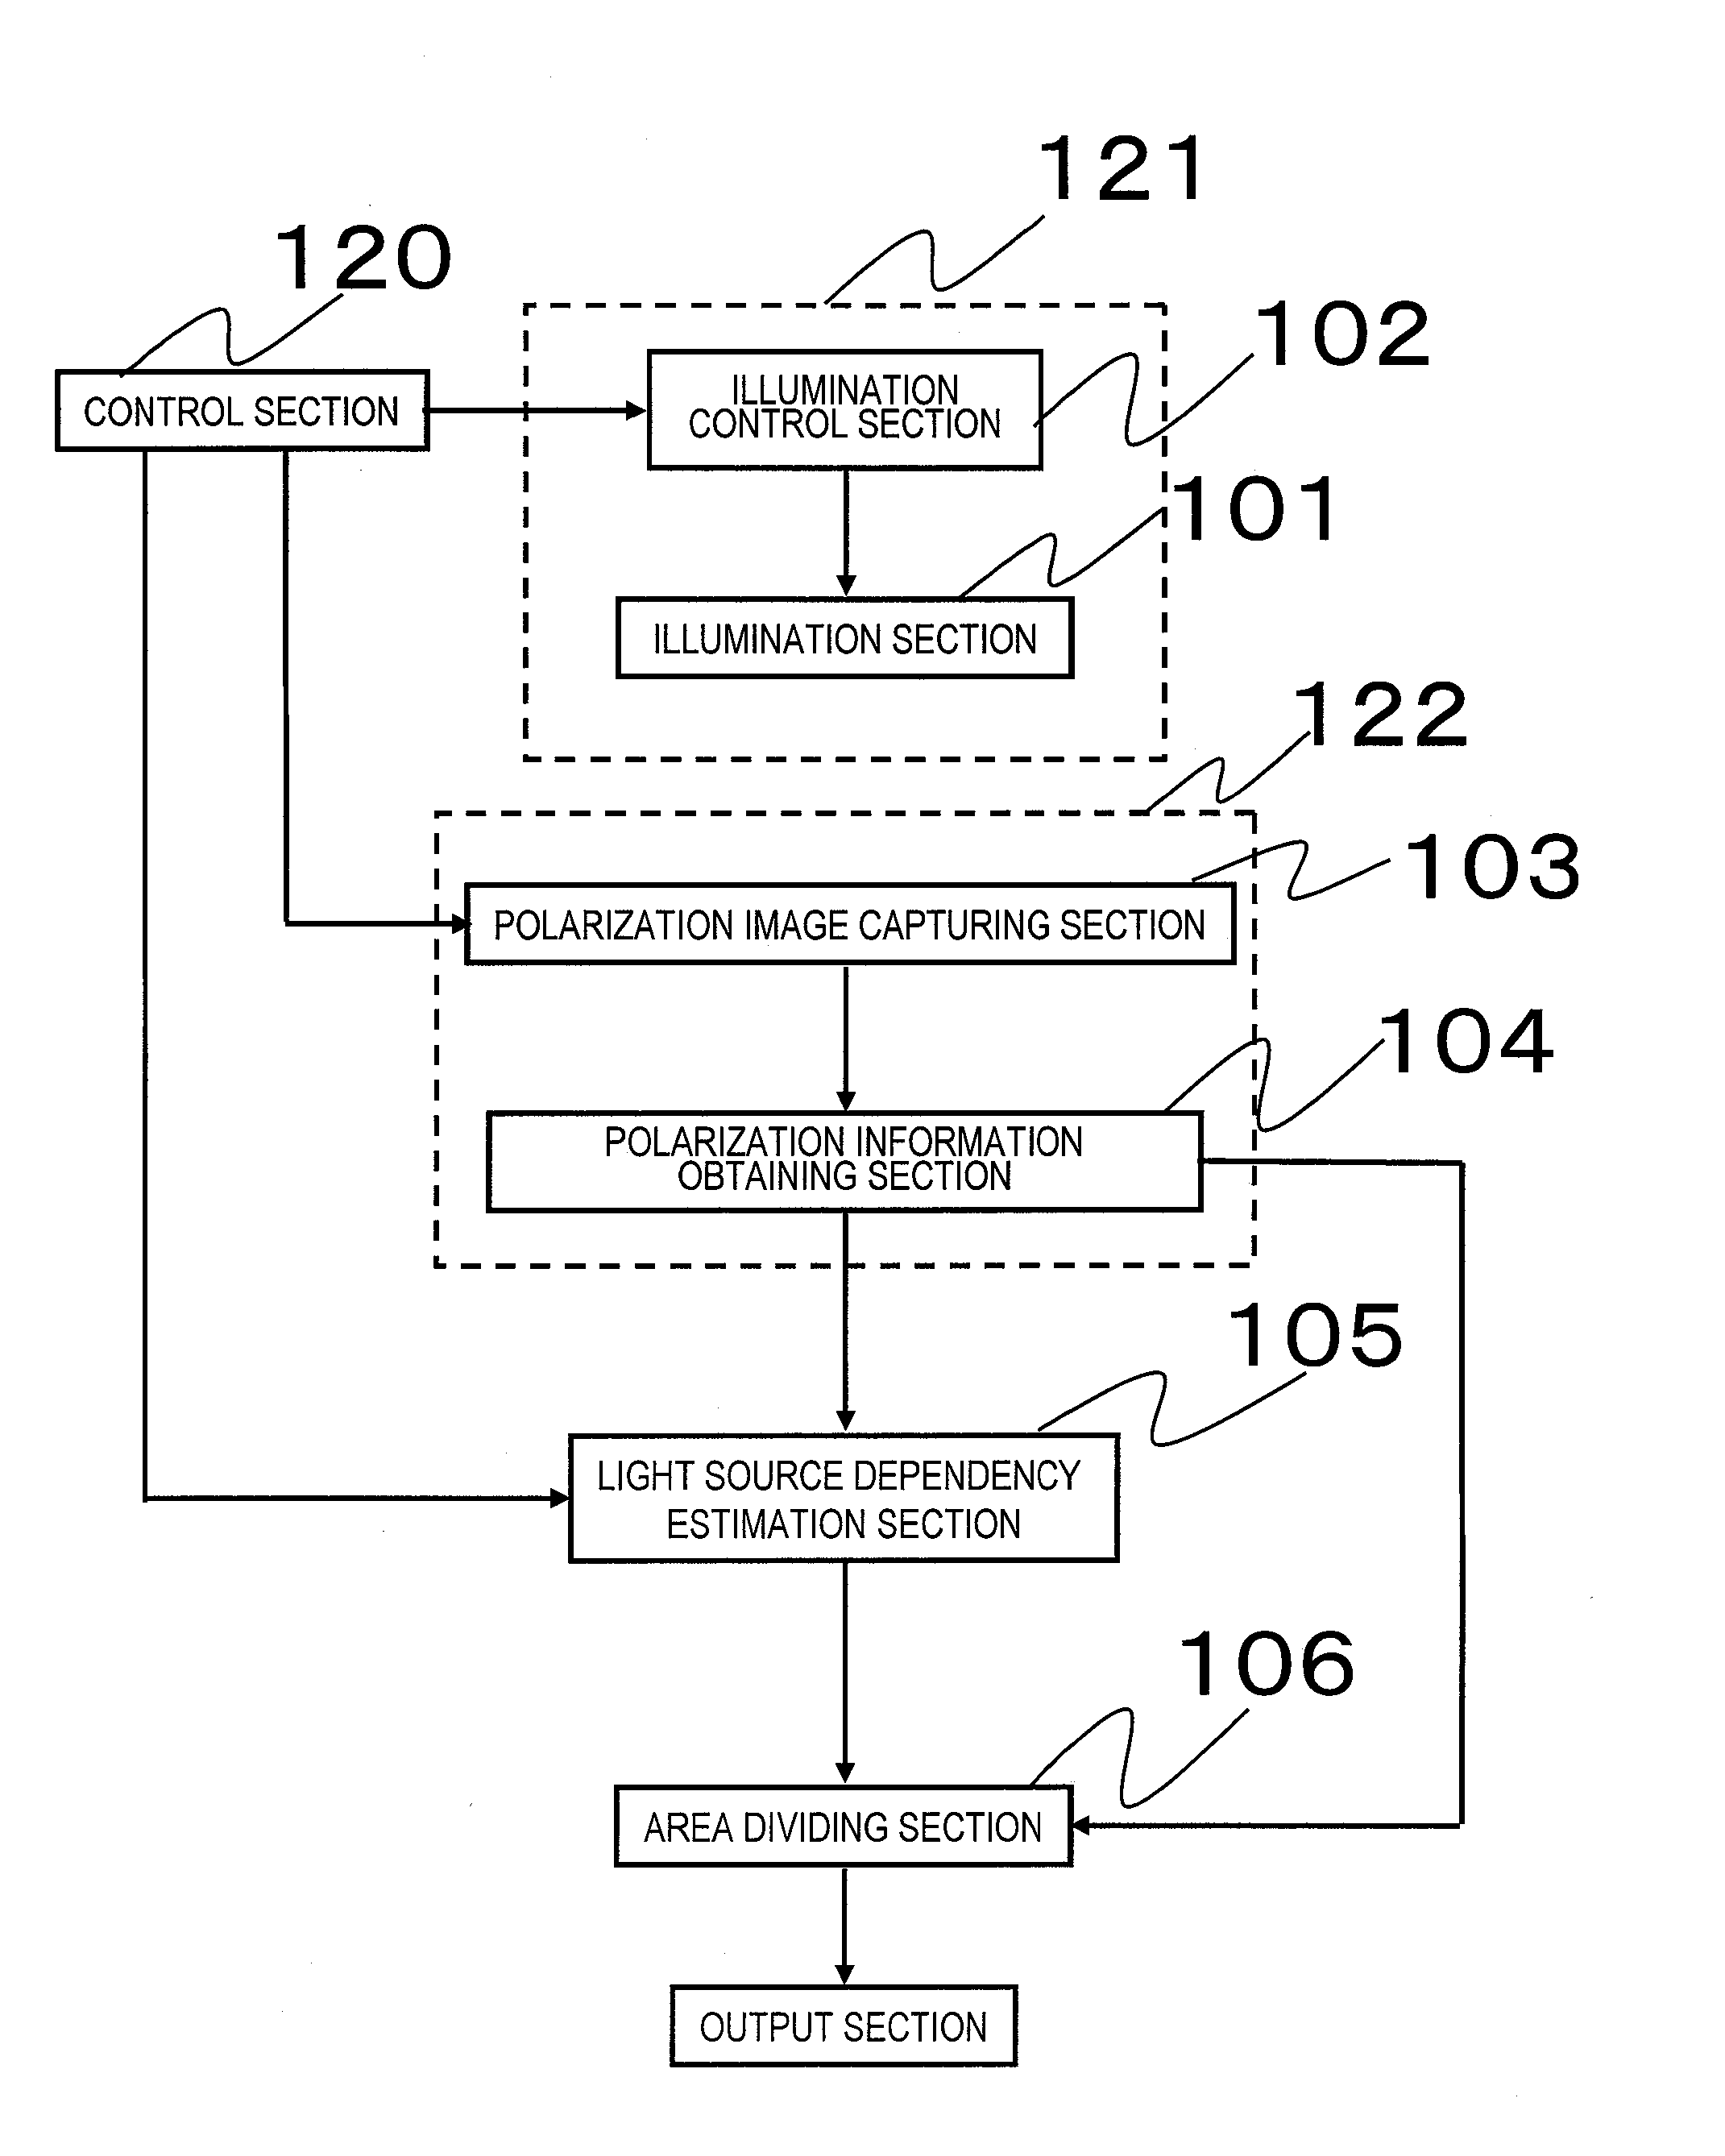 Image processing apparatus, image division program and image synthesising method